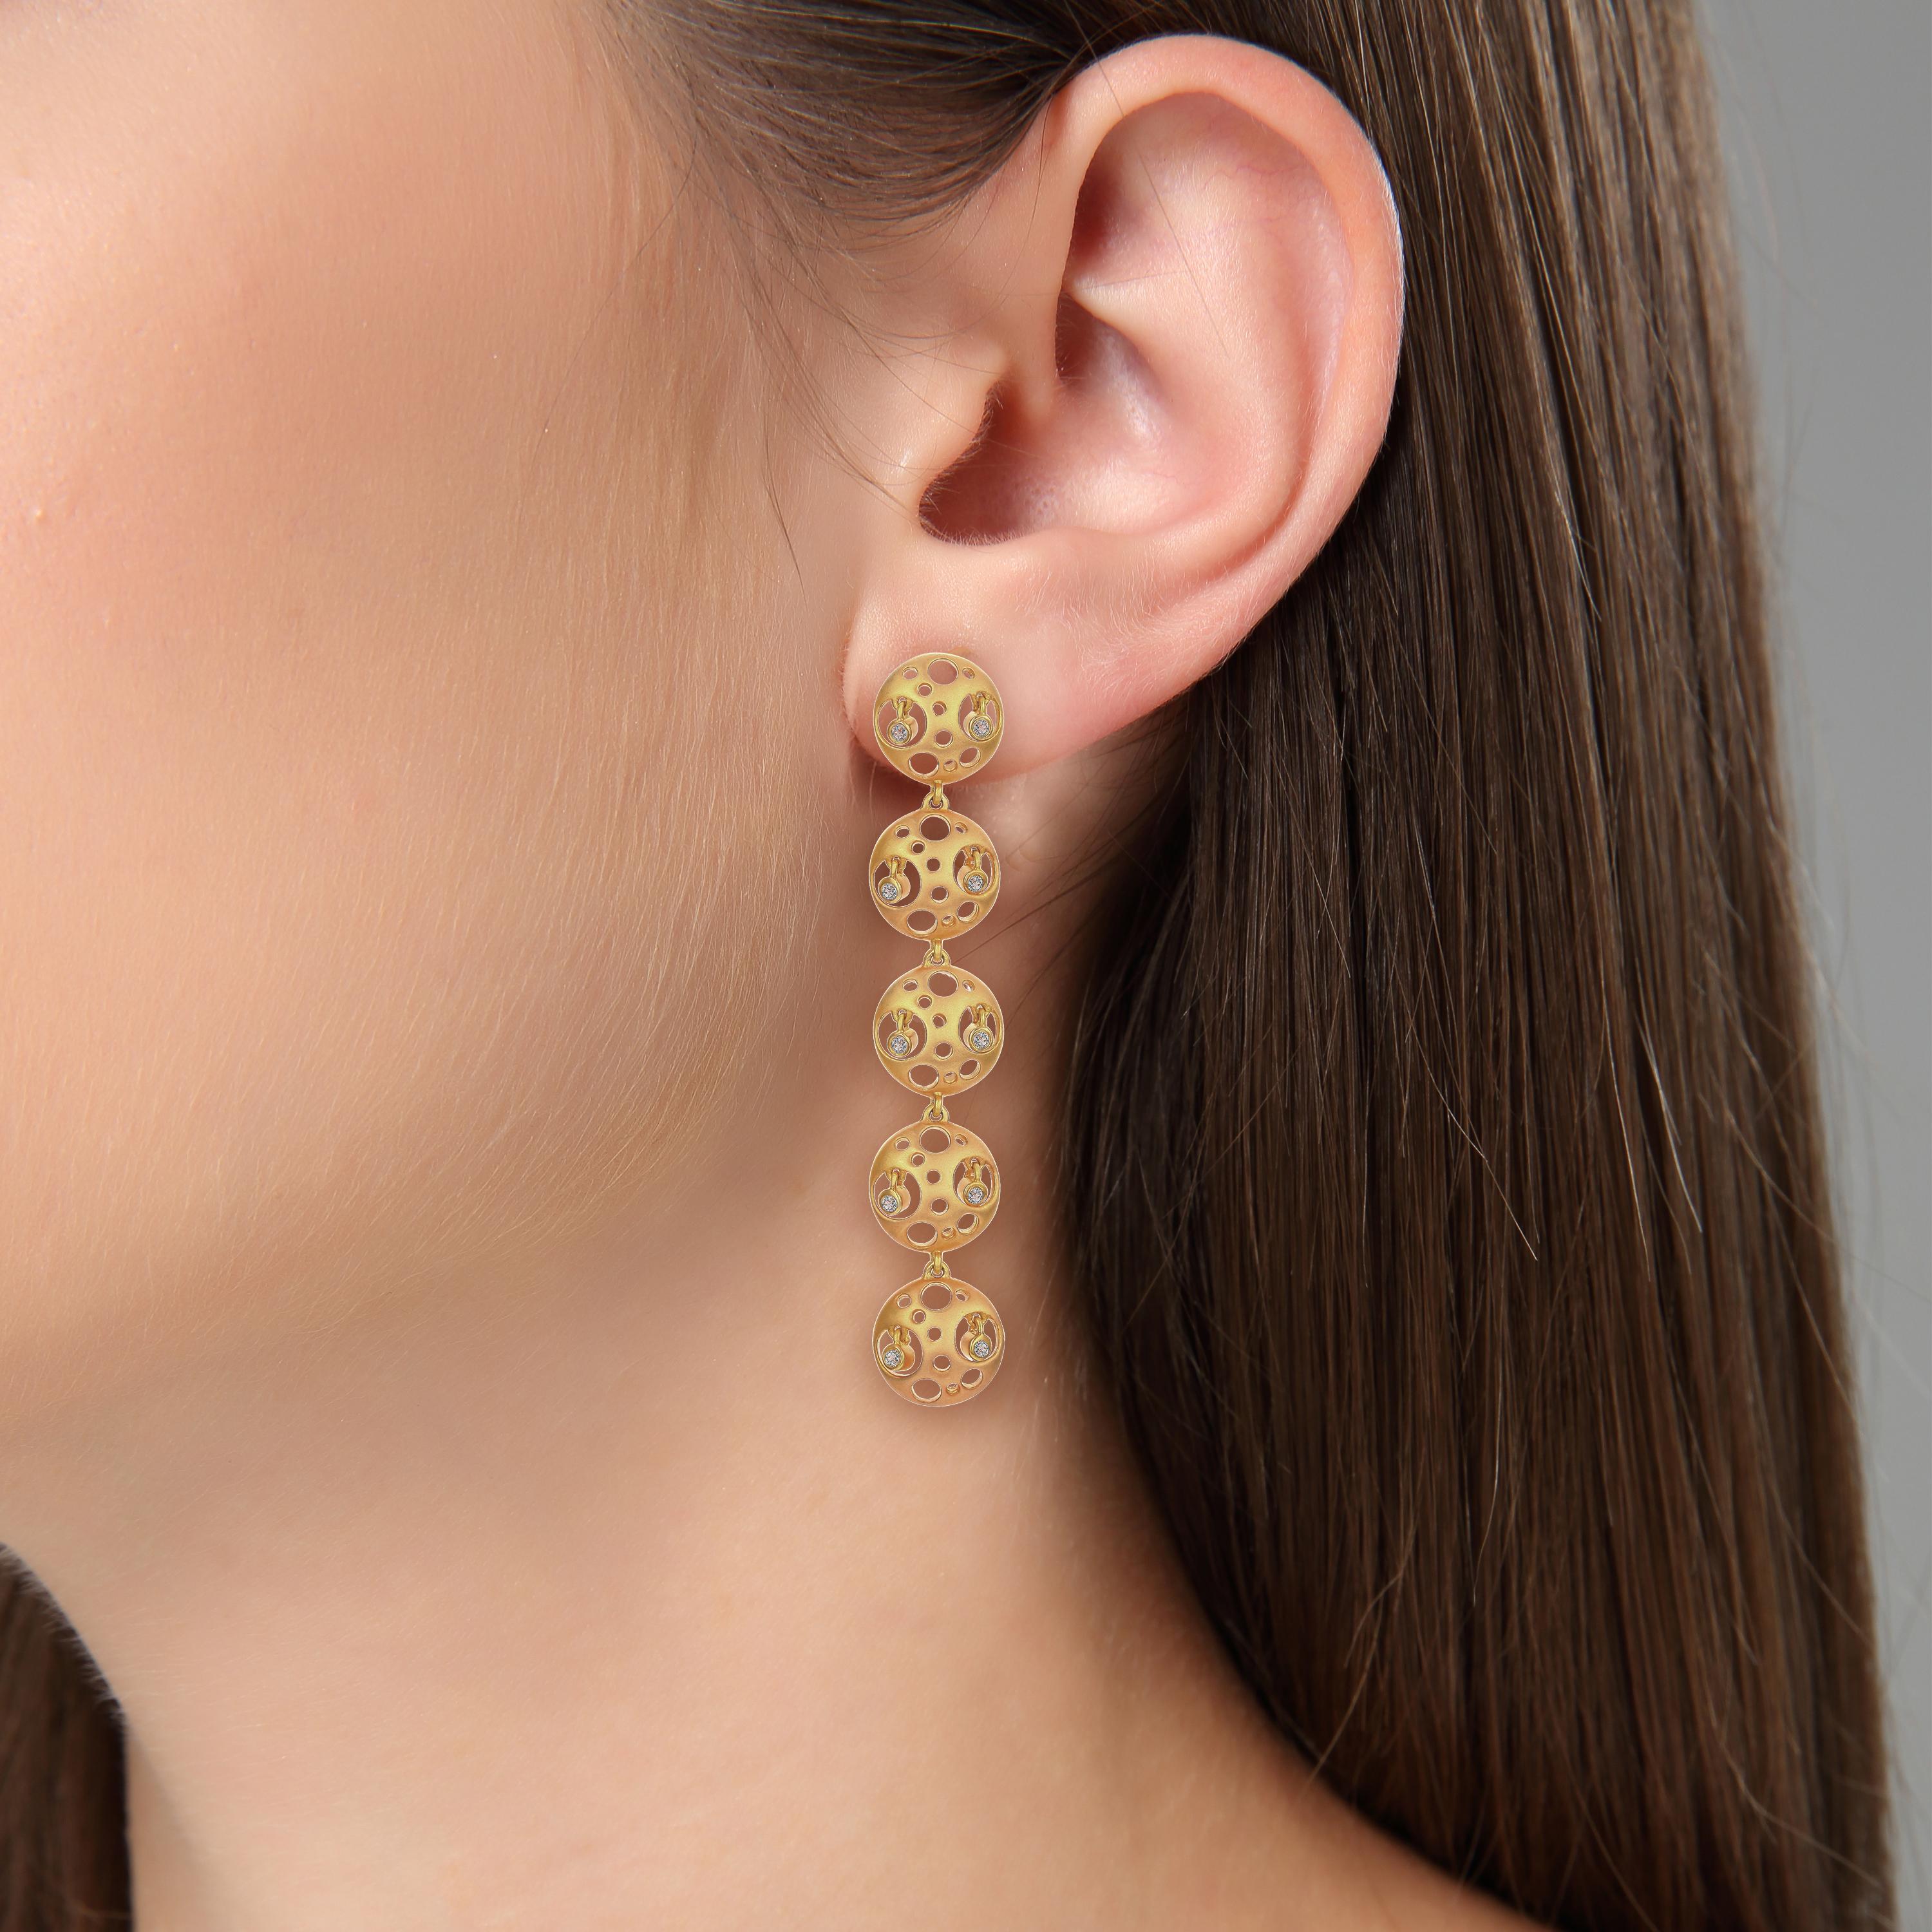 Description:
Drops long drop earrings with 0.2ct diamonds, set in satin polished 18ct yellow gold.

Inspiration:
This collection is designed in satin polished in yellow, white or rose gold and features tiny sparkling raindrops, seemingly suspended